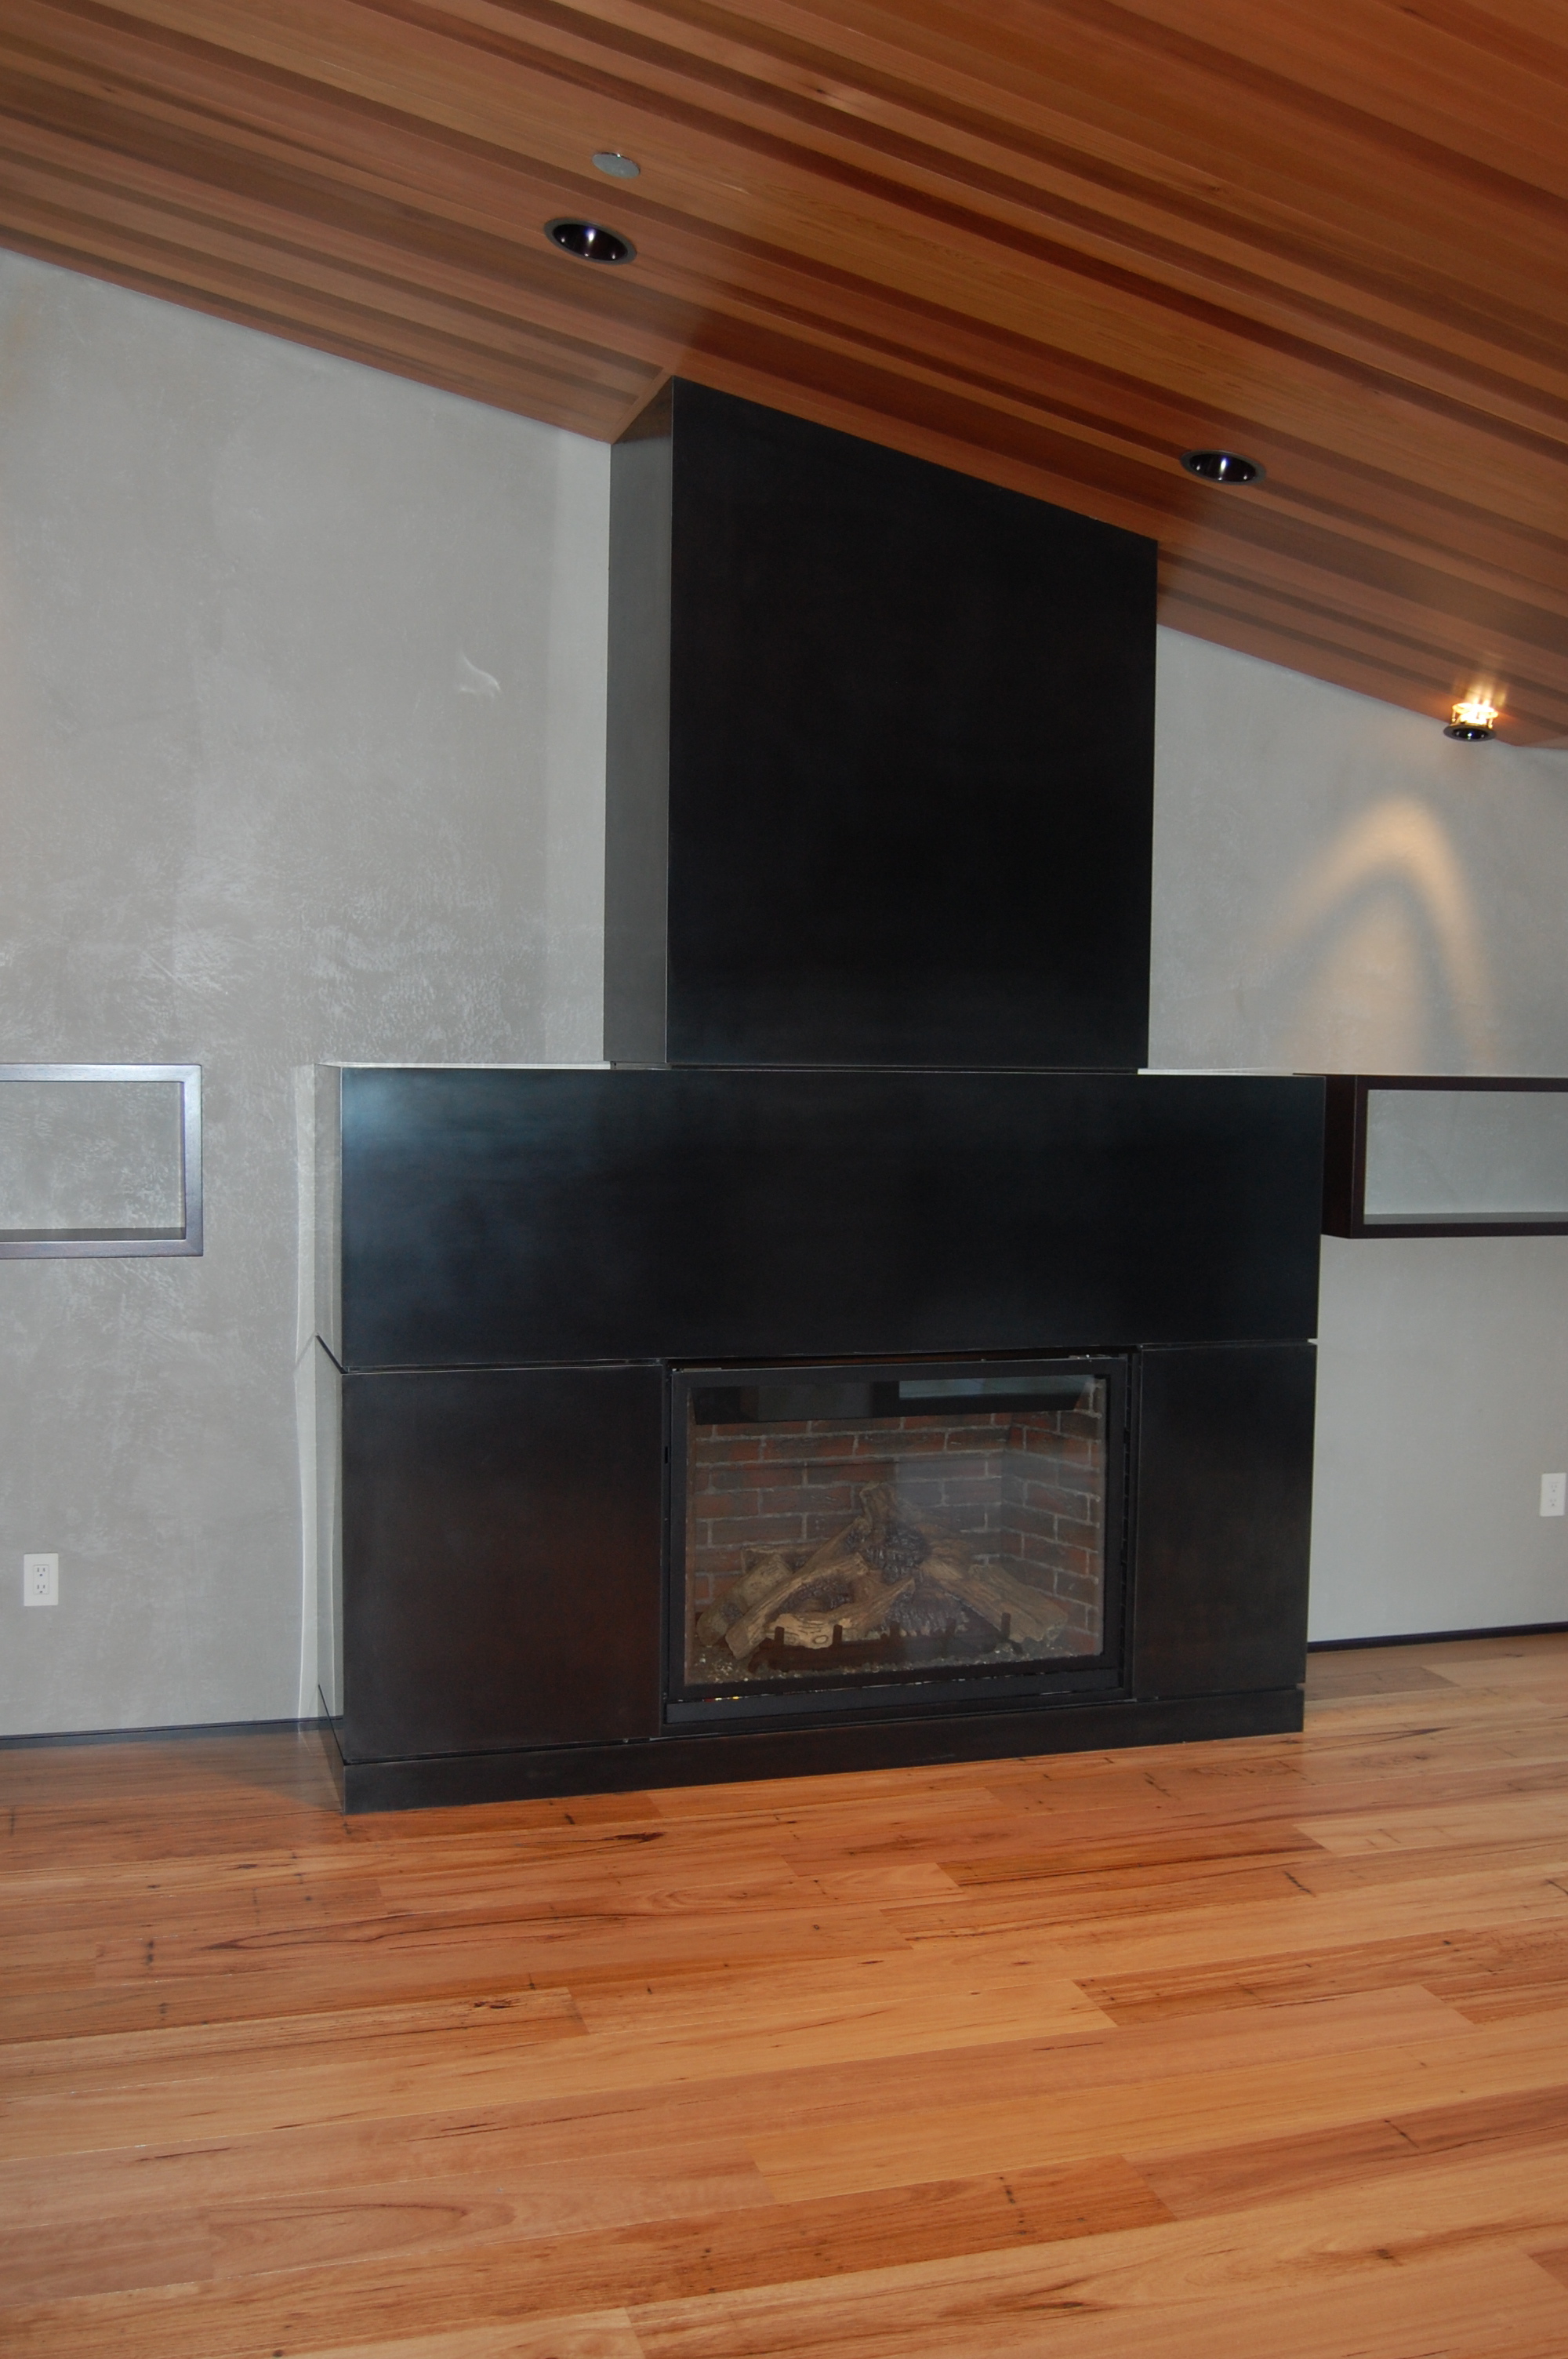  Fireplace Surround out of hot rolled steel.&nbsp;  Designed by Giulietti/Schouten Architects 